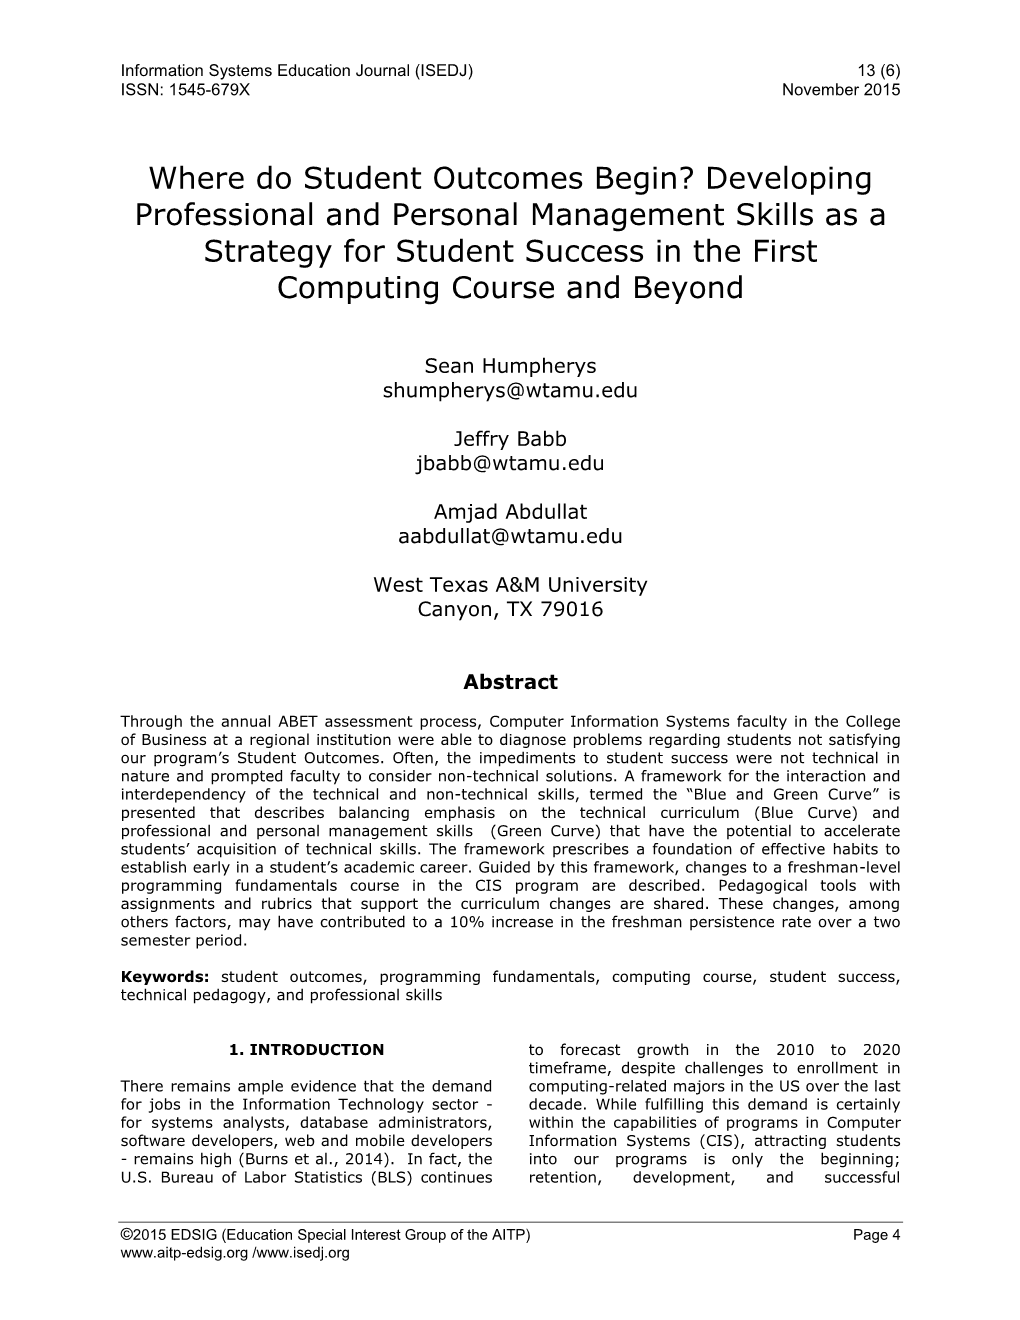 Where Do Student Outcomes Begin? Developing Professional and Personal Management Skills As a Strategy for Student Success in the First Computing Course and Beyond